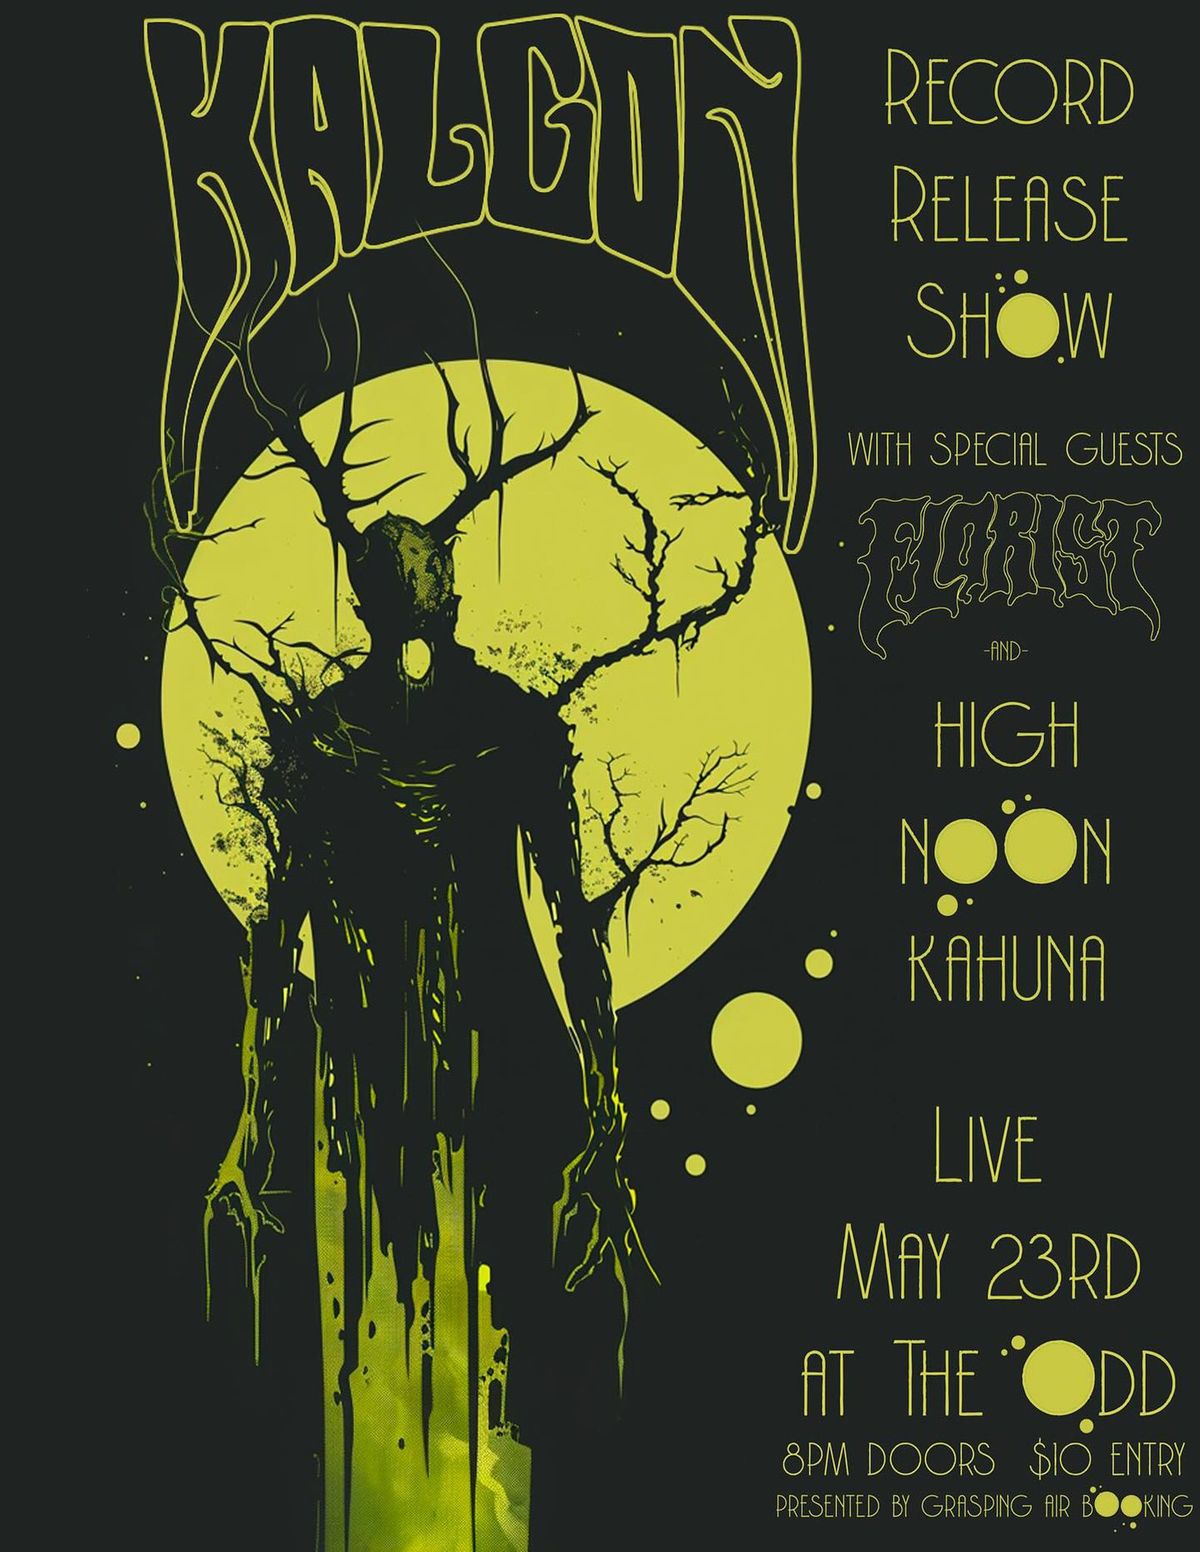 May 23 - Kalgon (Record Release), Florist, High Noon Kahuna at The Odd